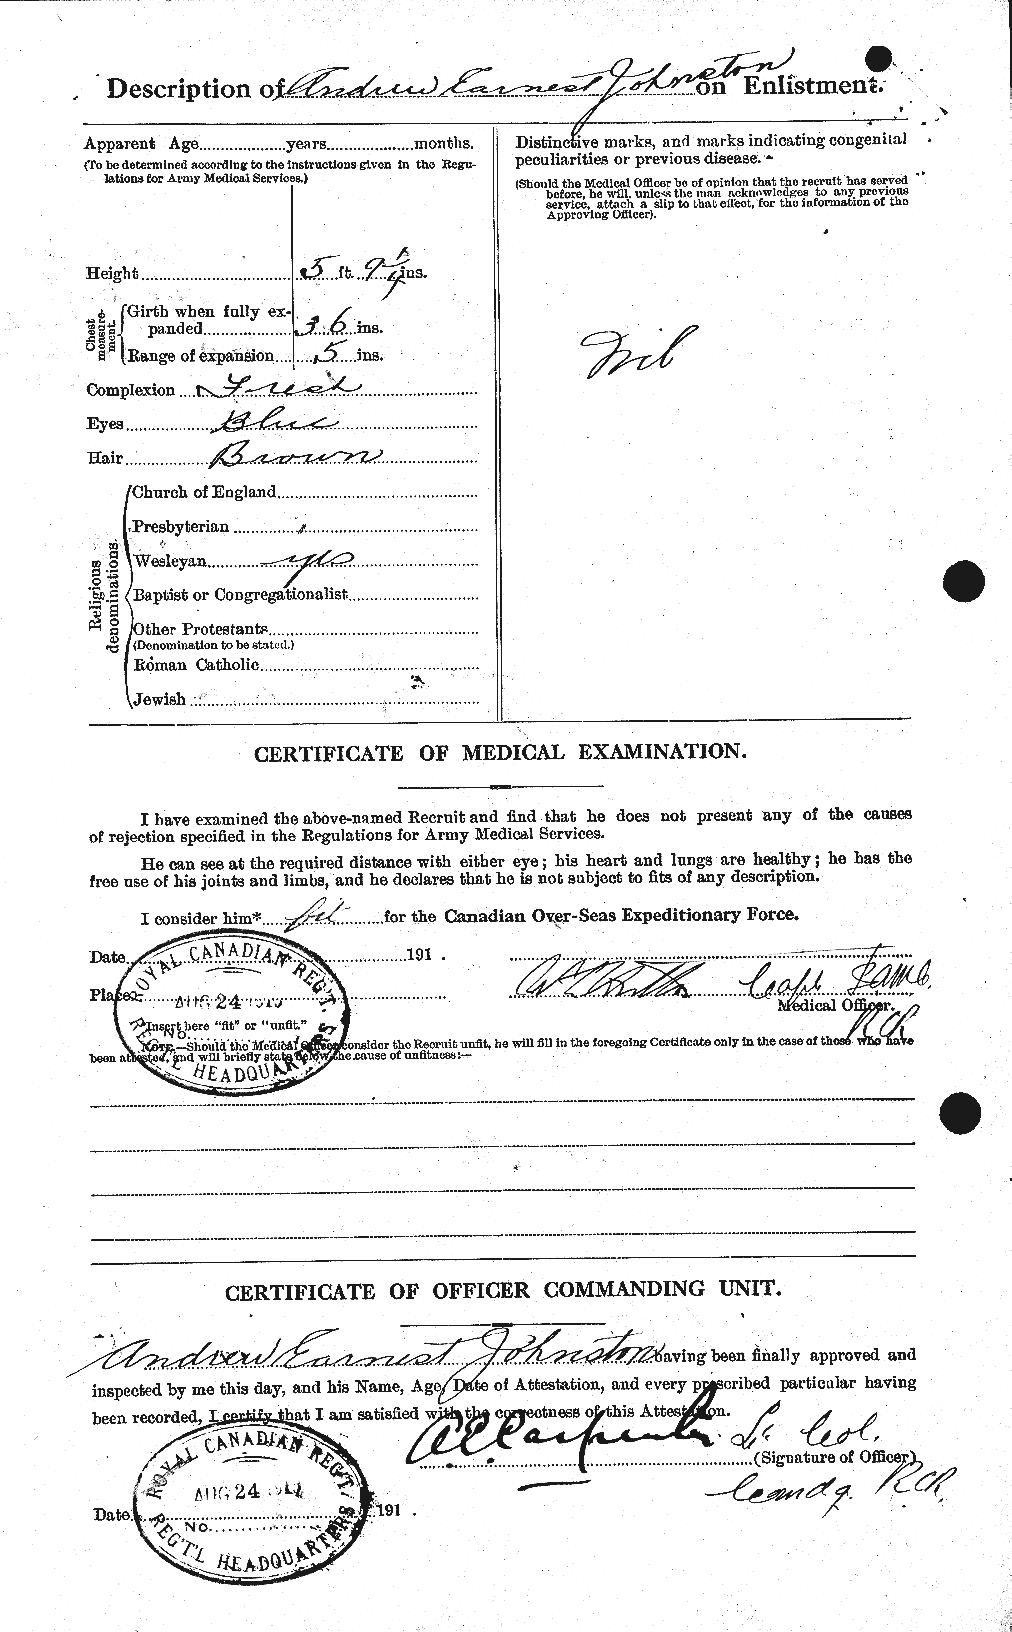 Personnel Records of the First World War - CEF 421017b